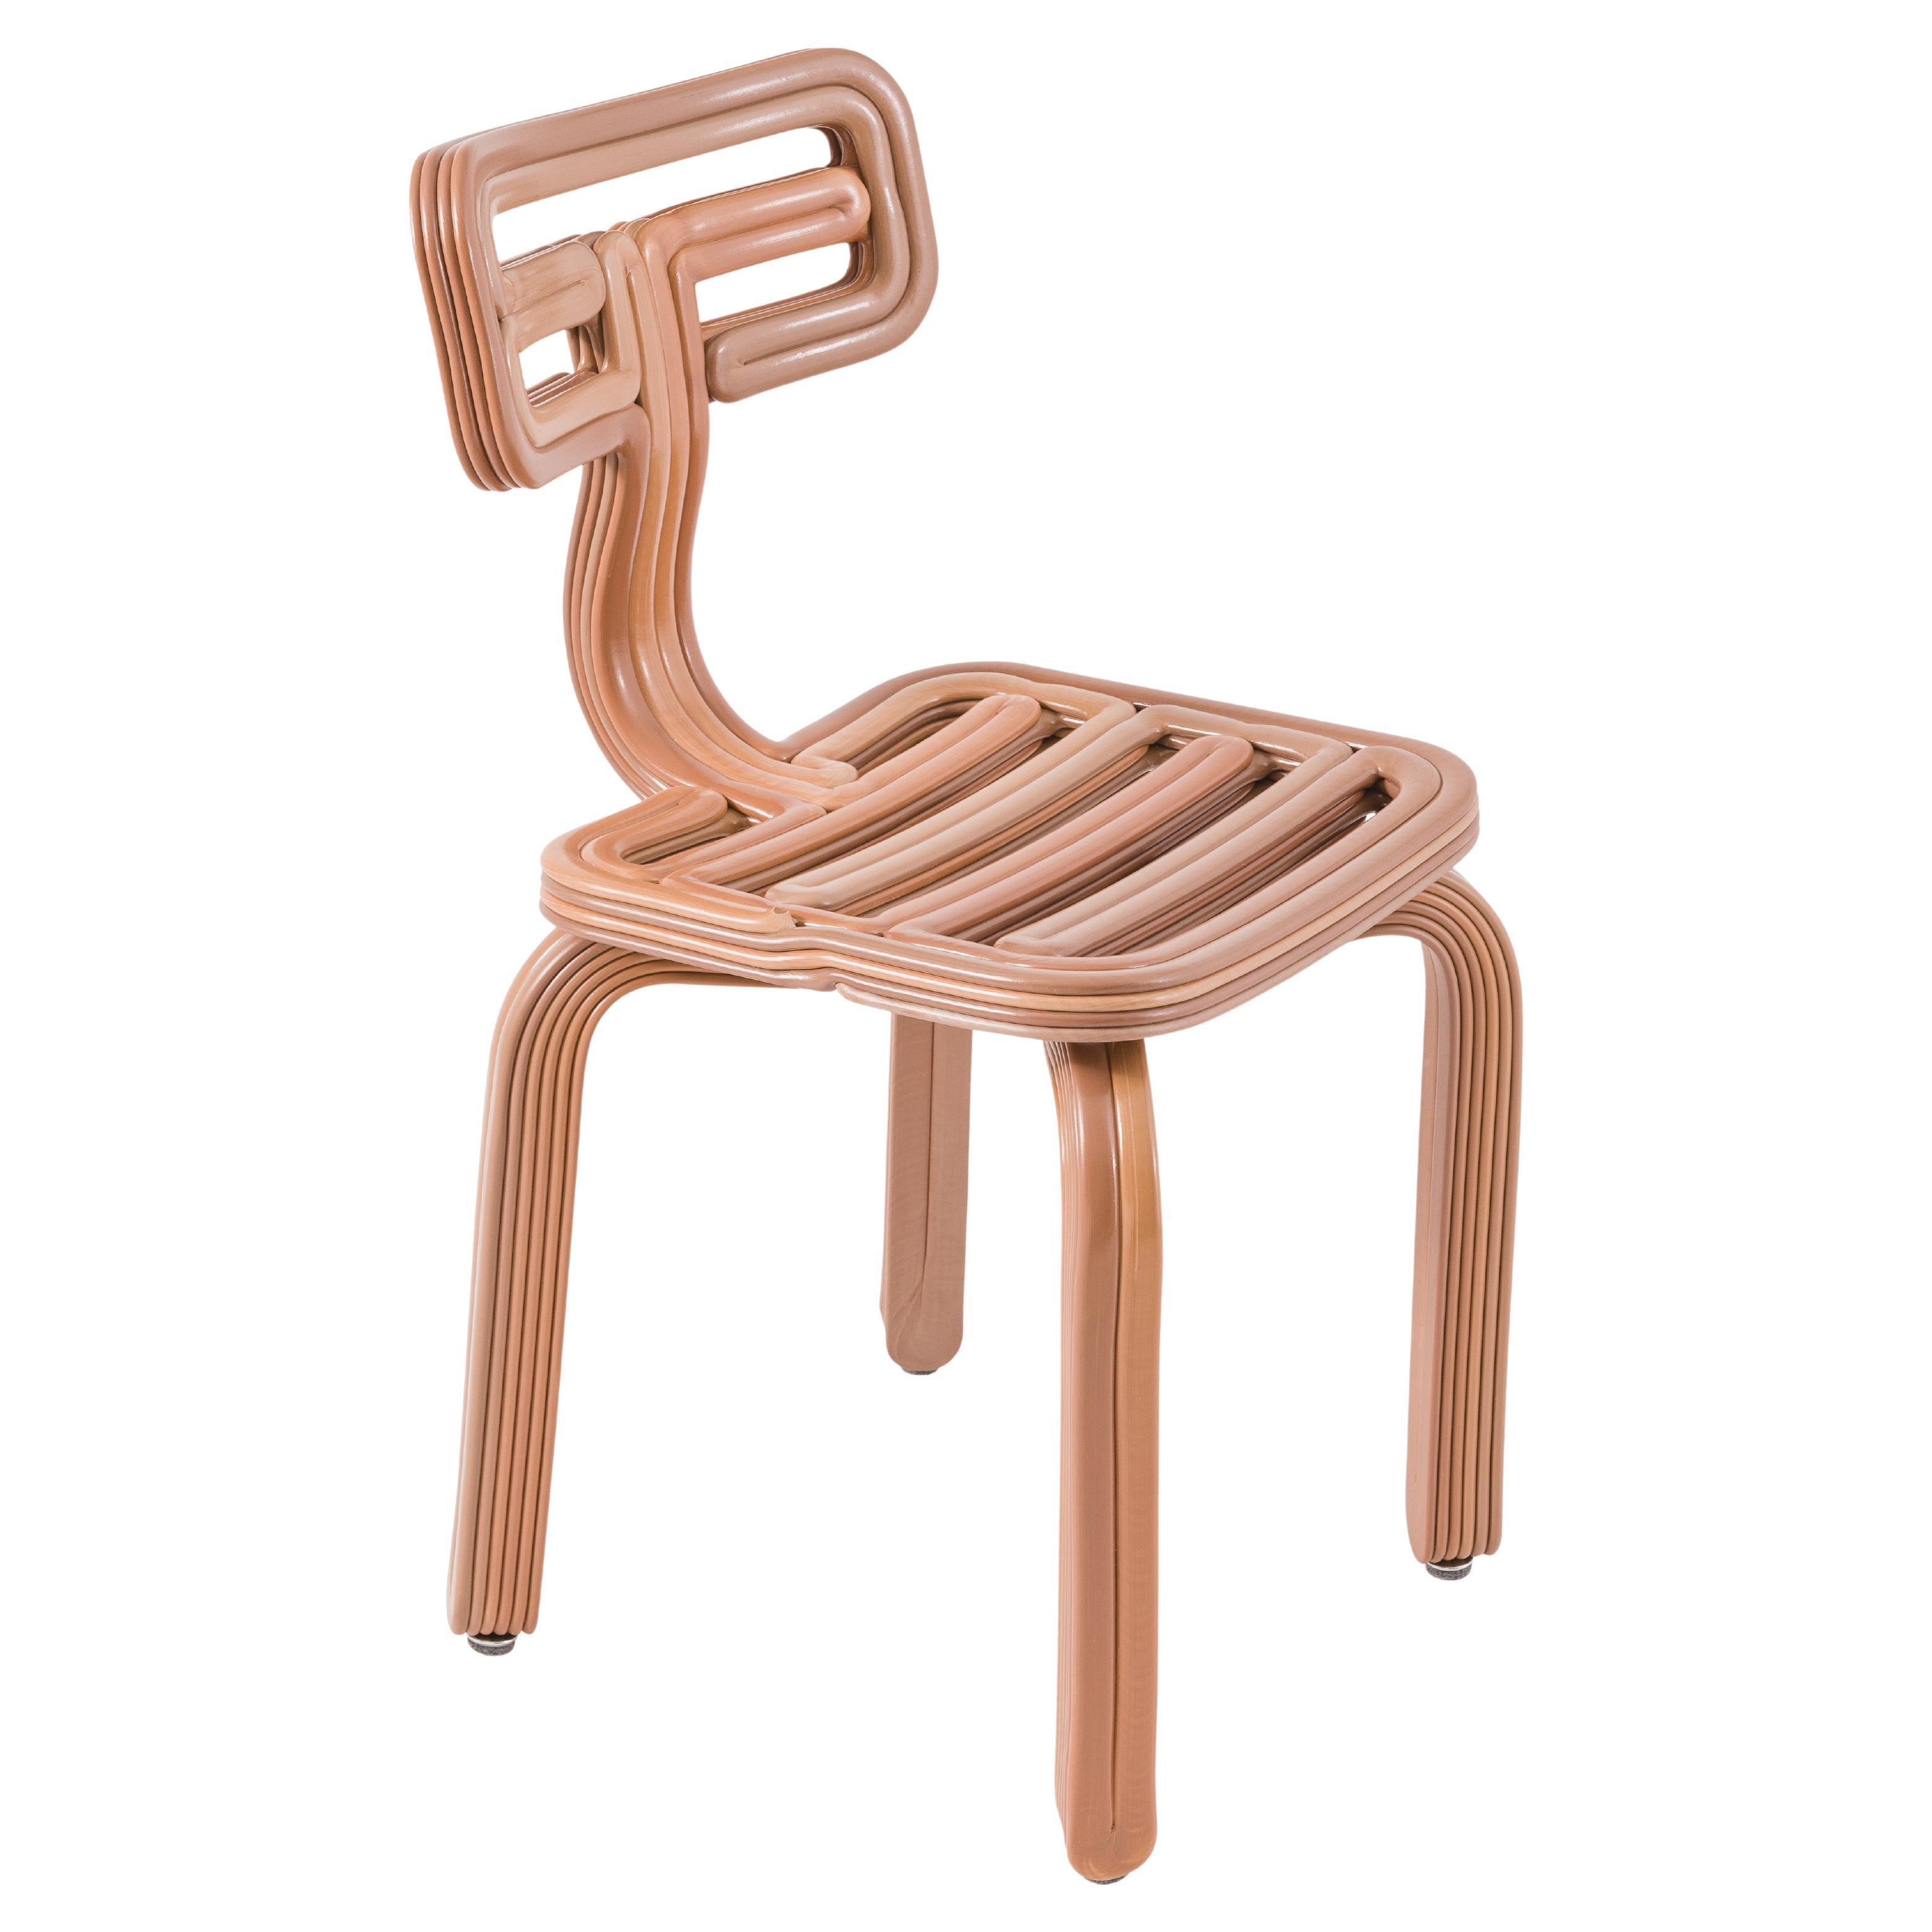 Chubby Chair in Toffee 3D Printed Recycled Plastic by Kooij